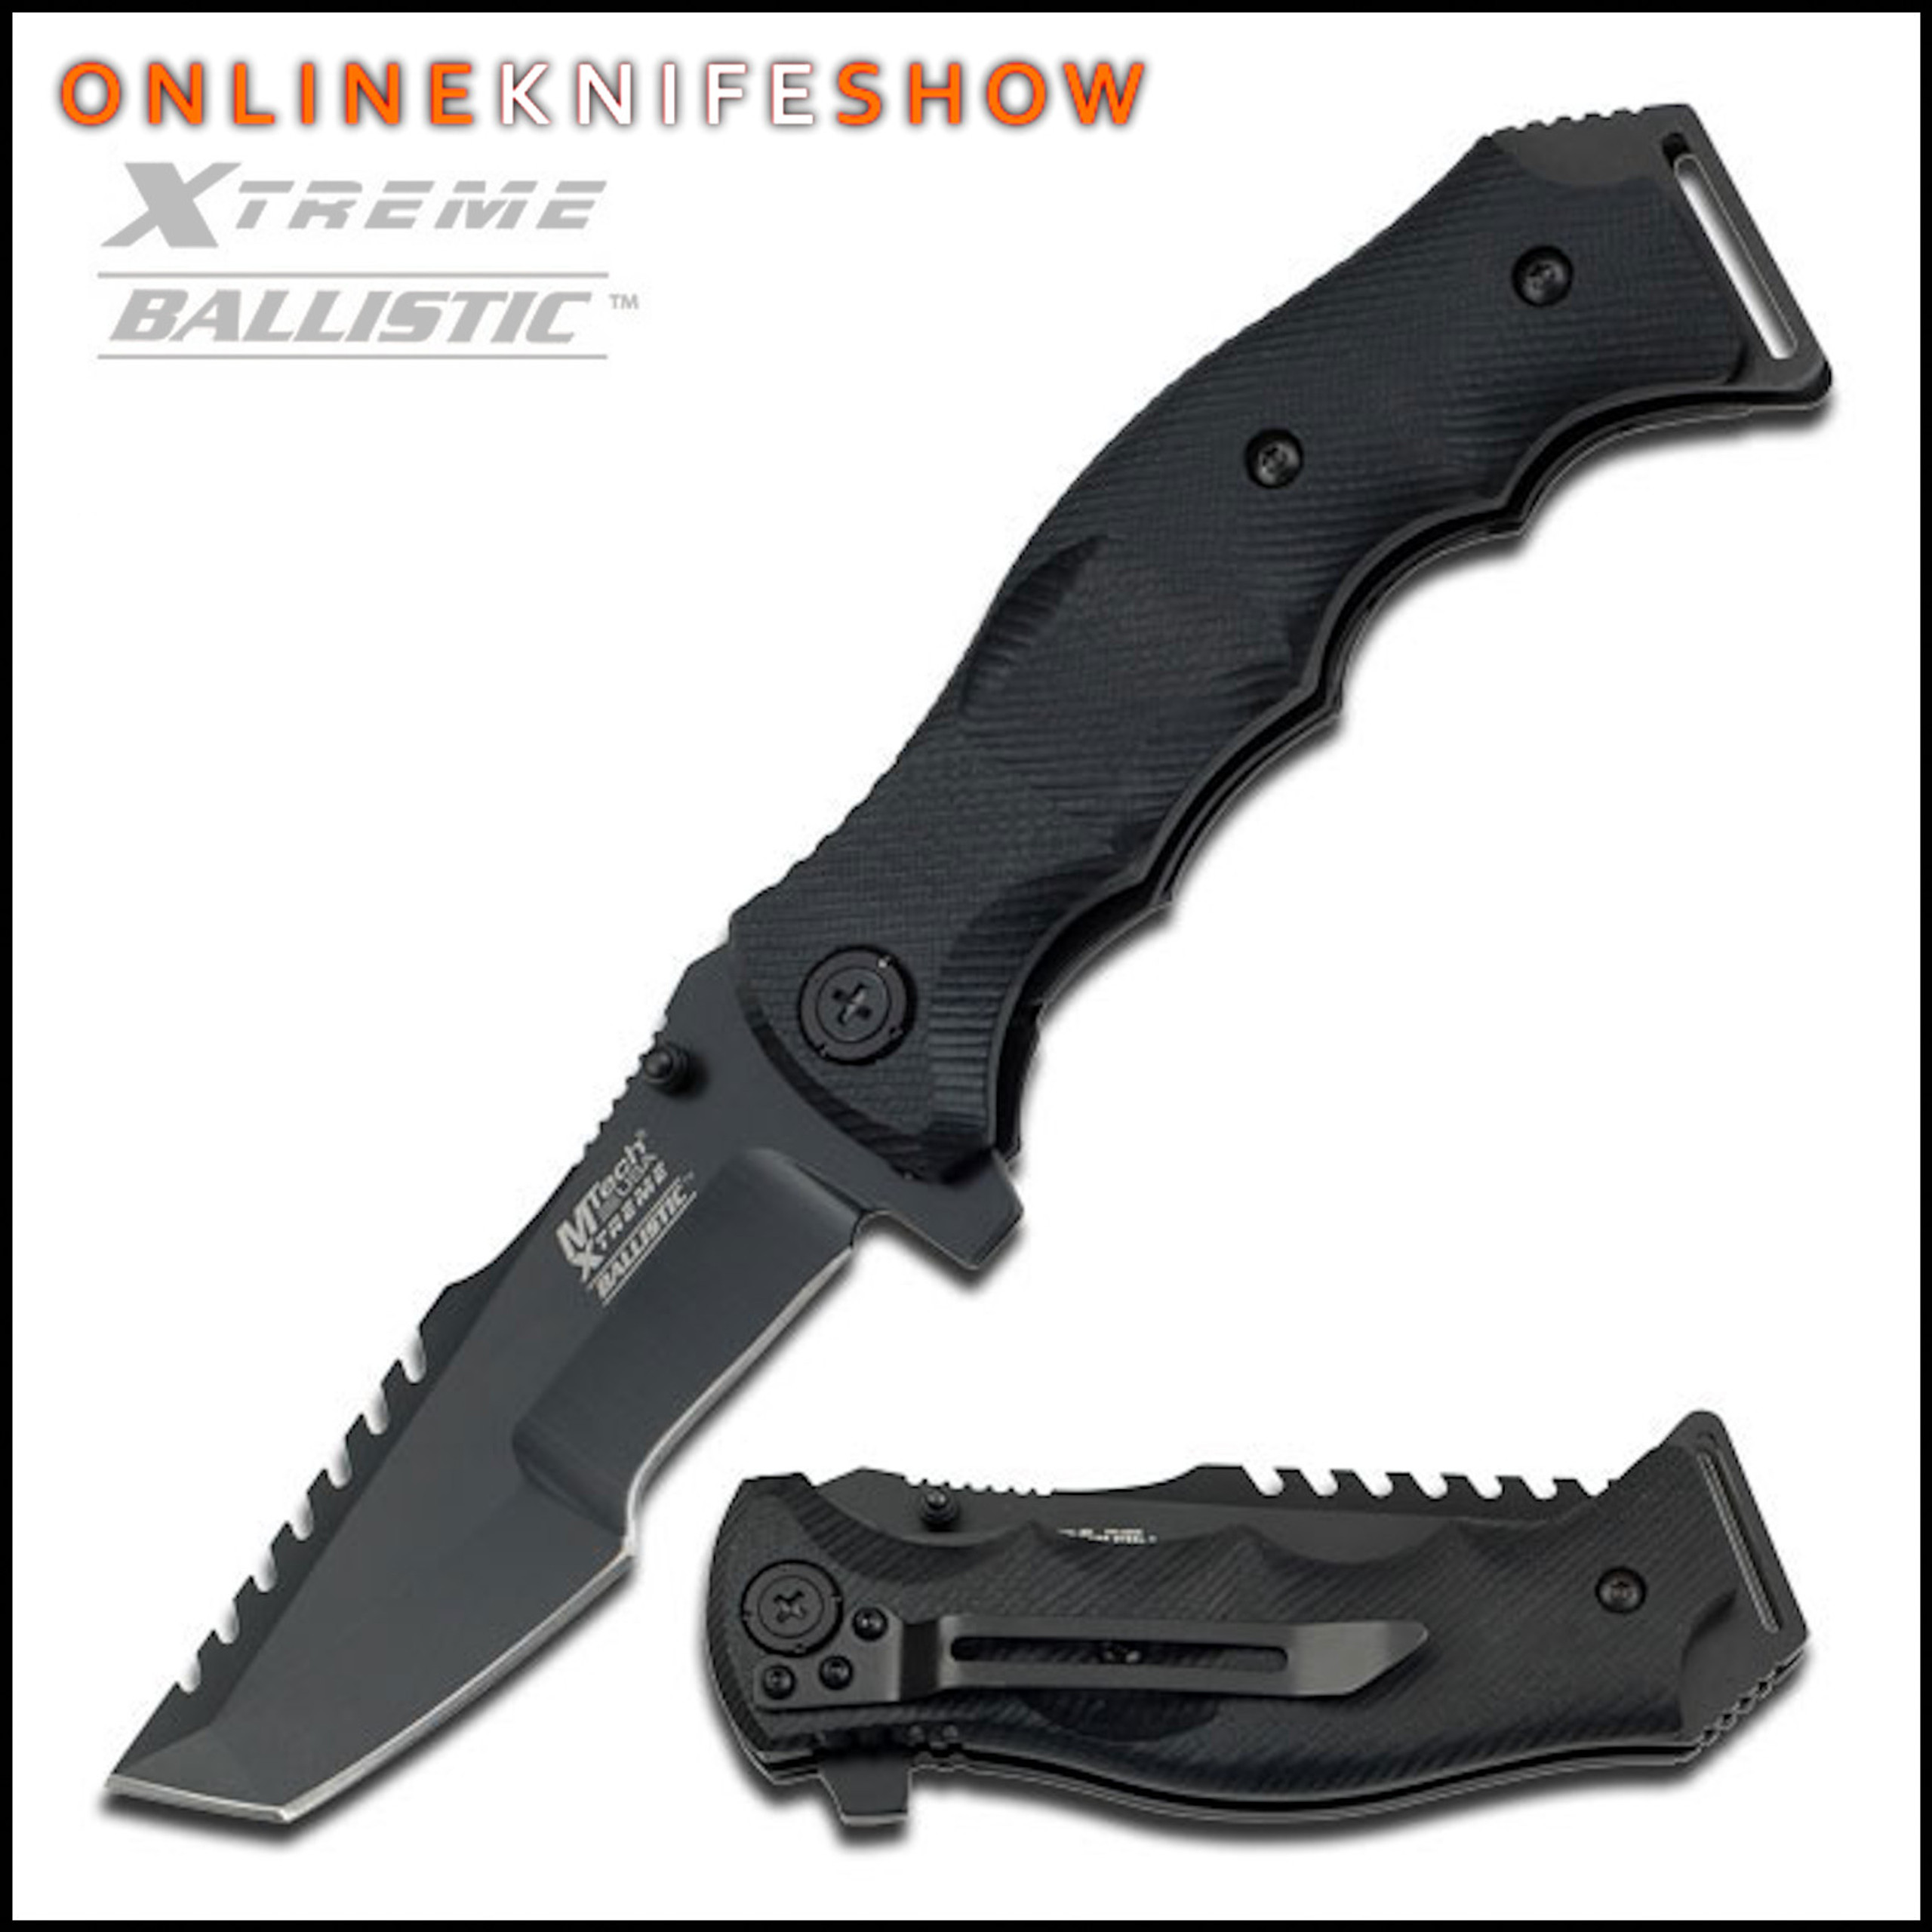 CS:GO Knives For Sale - Buy Real CSGO Knives at OnlineKnifeShow.com